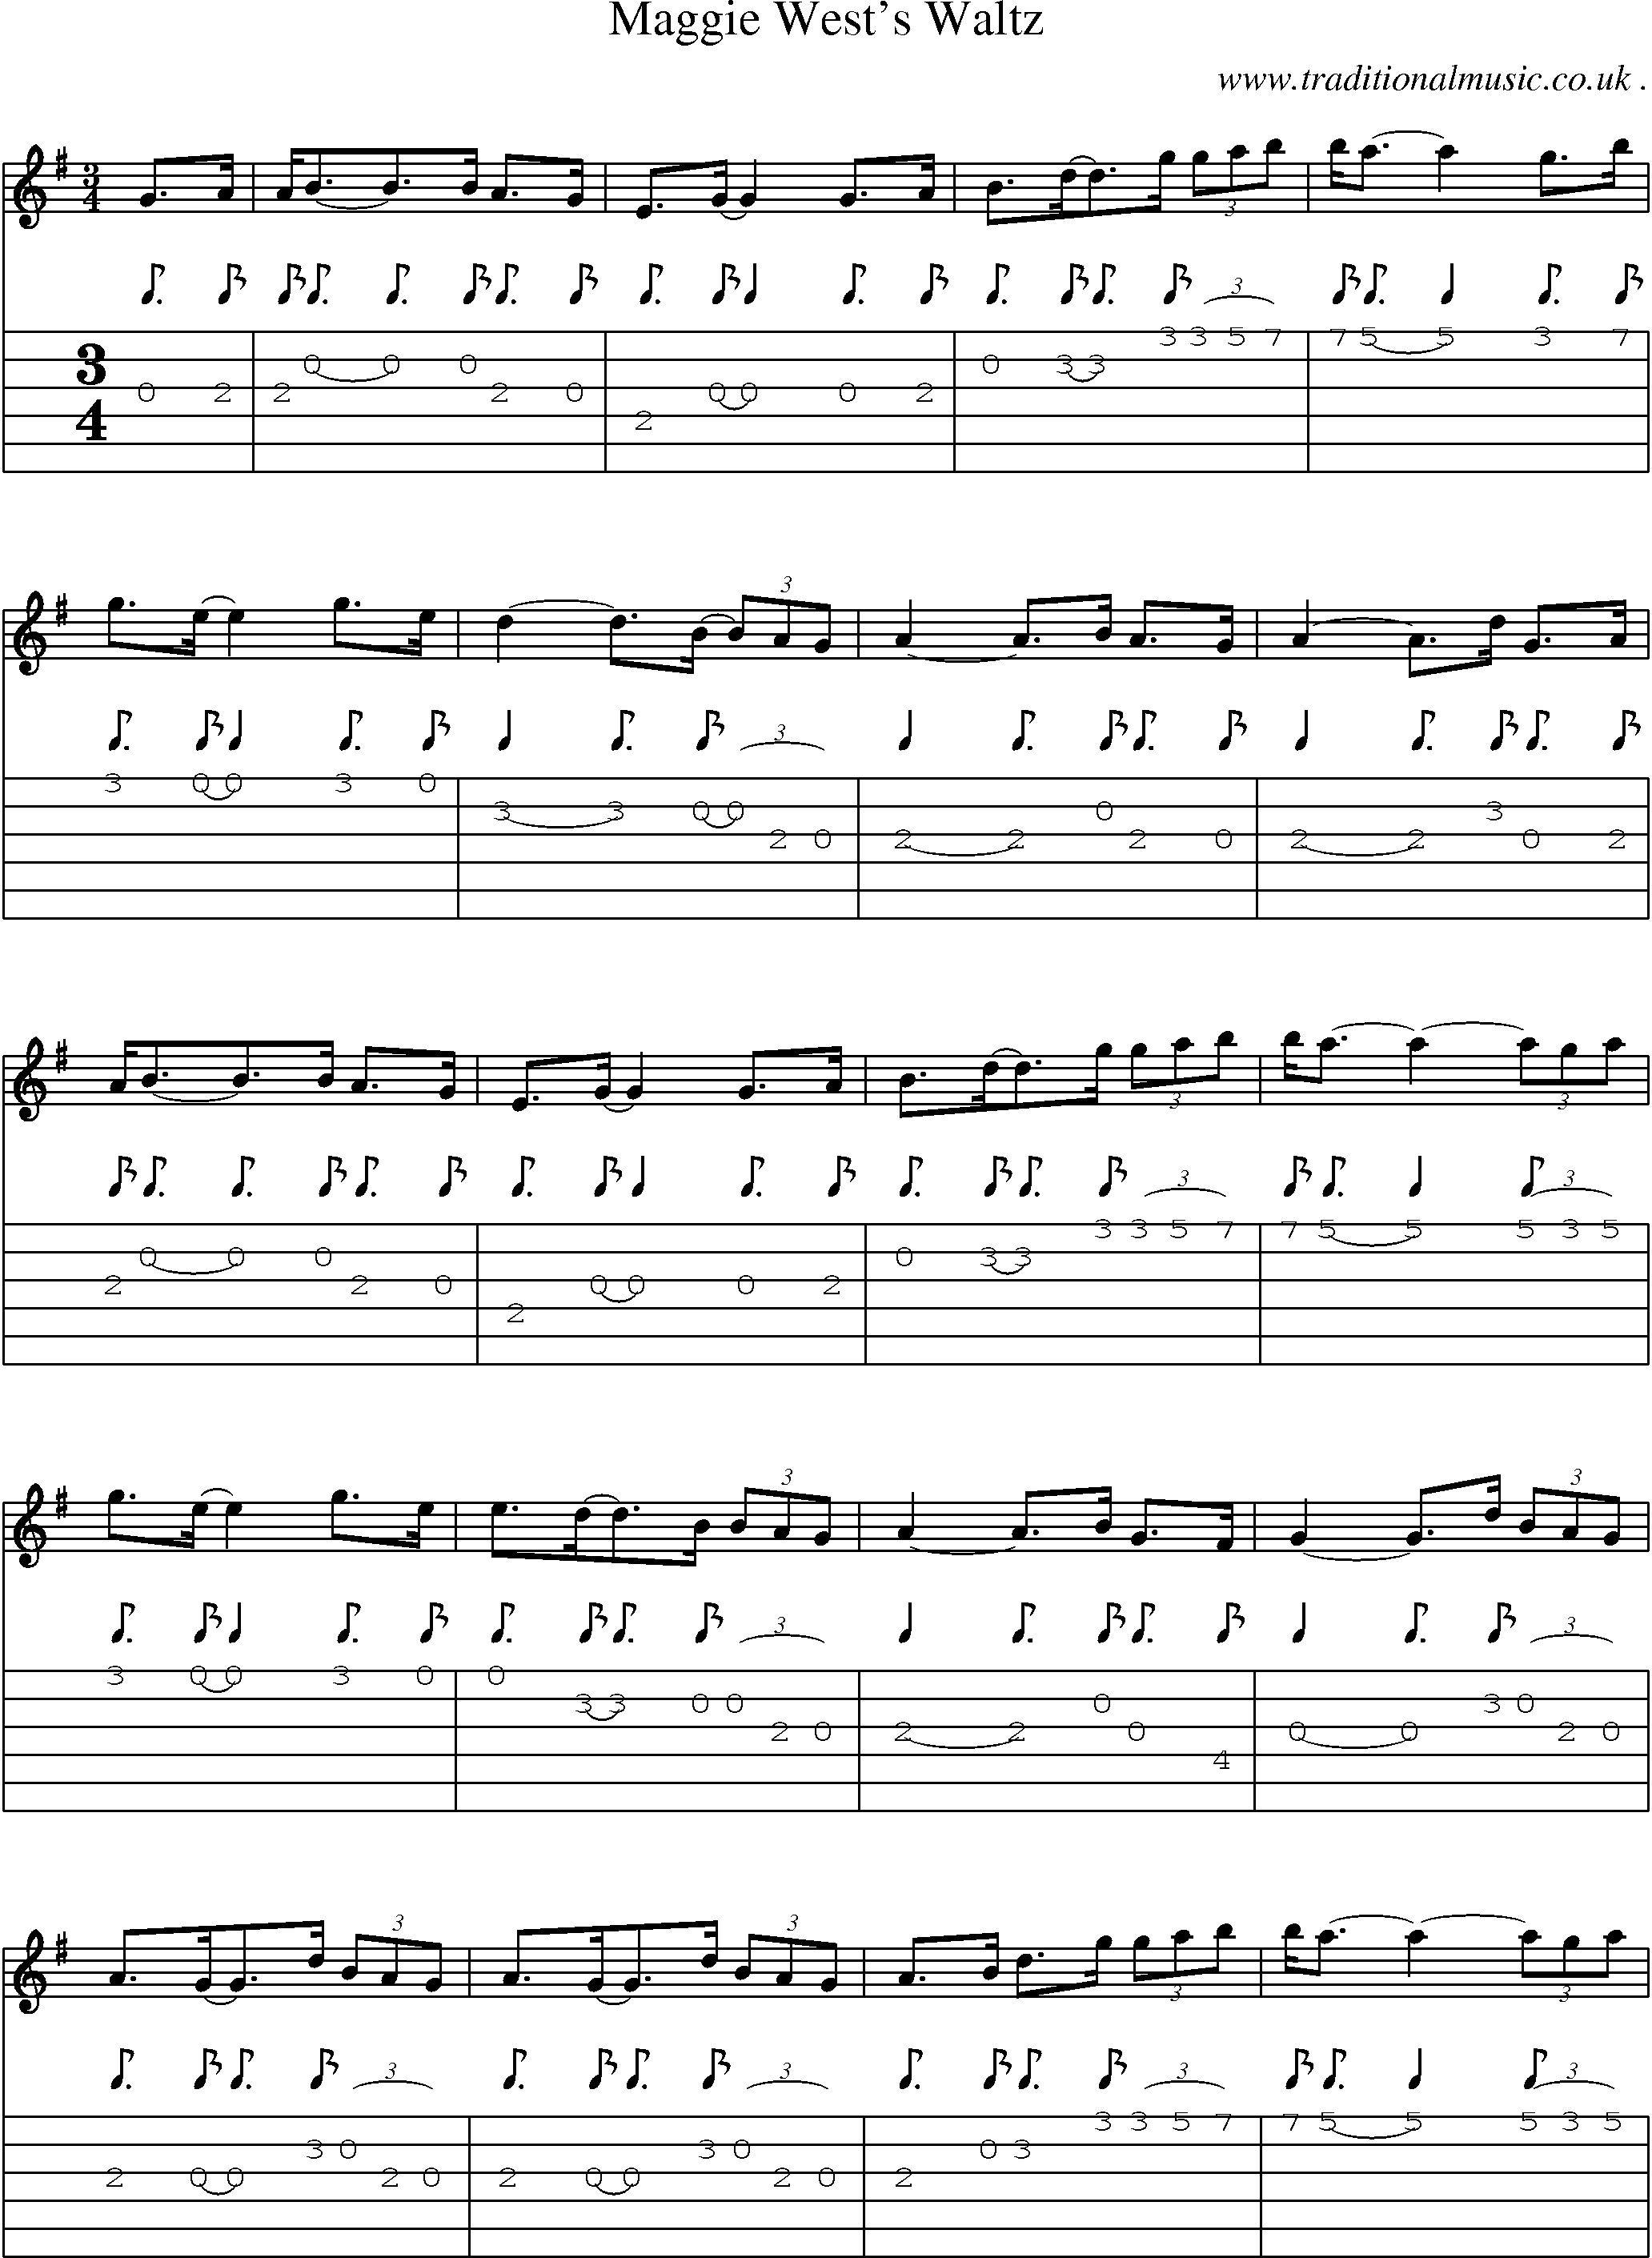 Sheet-music  score, Chords and Guitar Tabs for Maggie Wests Waltz